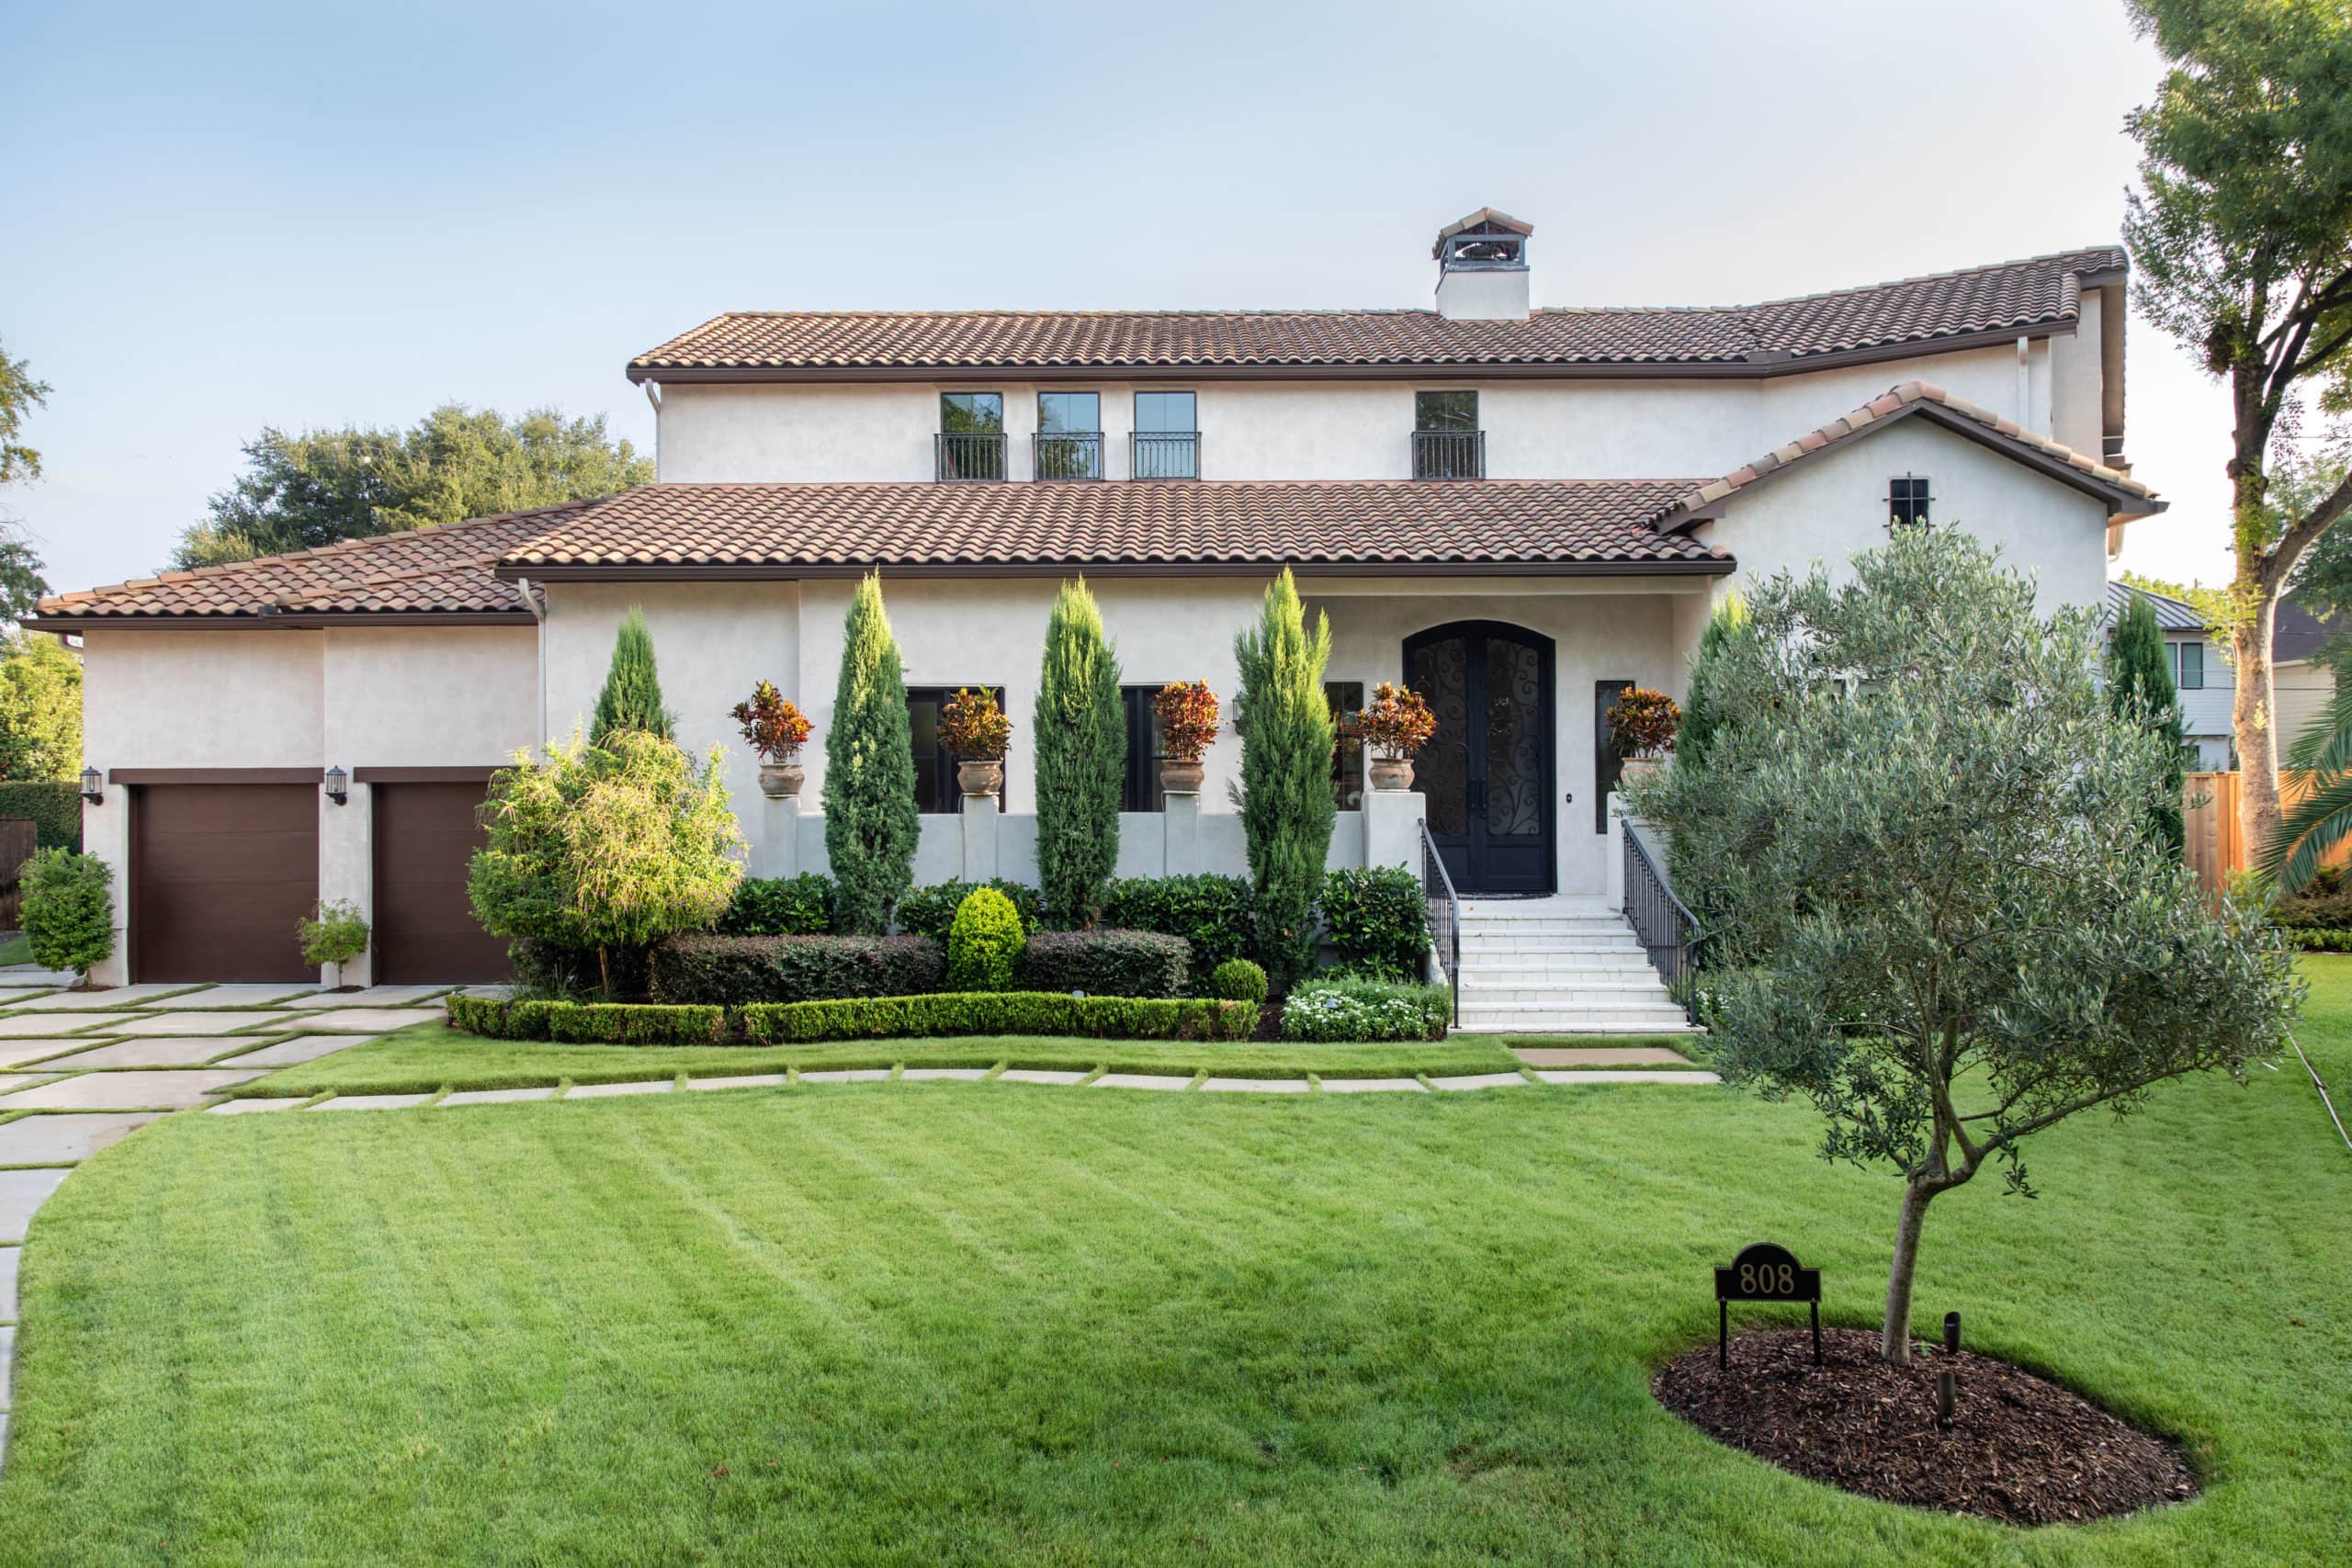 Exterior of a Mediterranean style home in Bellaire, TX